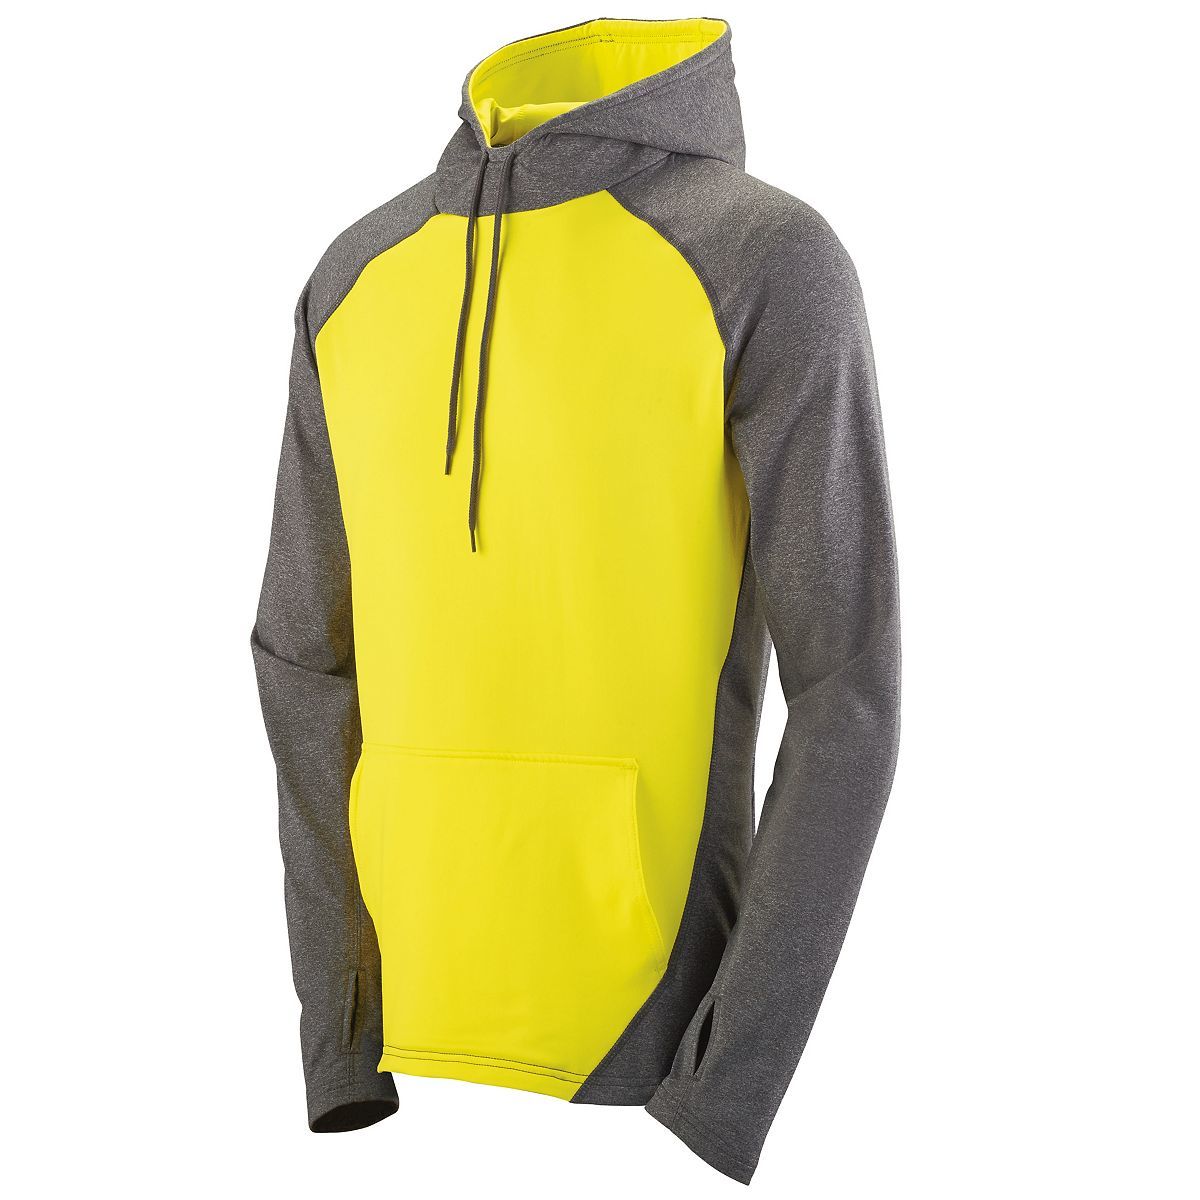 Augusta Sportswear Zeal Hoodie in Graphite Heather/Power Yellow  -Part of the Adult, Adult-Hoodie, Hoodies, Augusta-Products product lines at KanaleyCreations.com